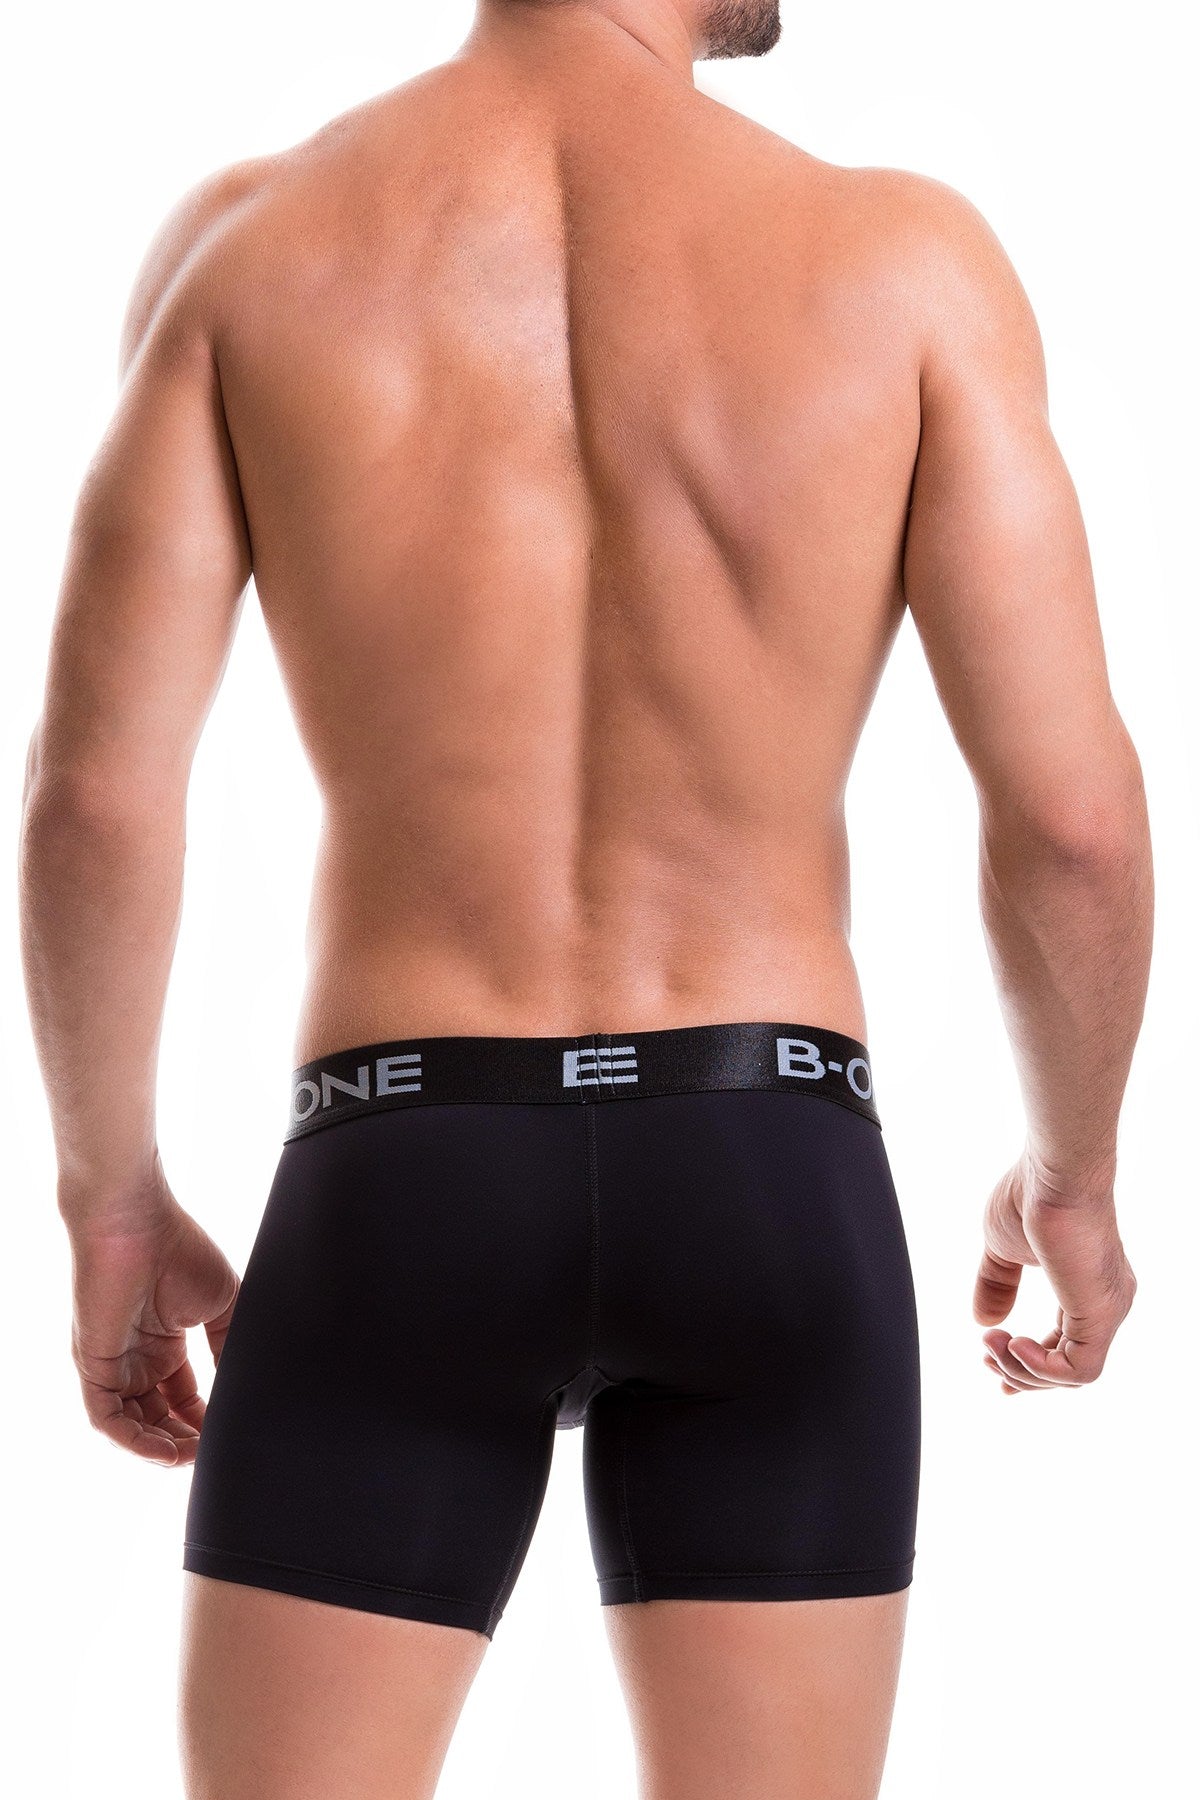 B-One by JOR Black Classic Boxer Brief